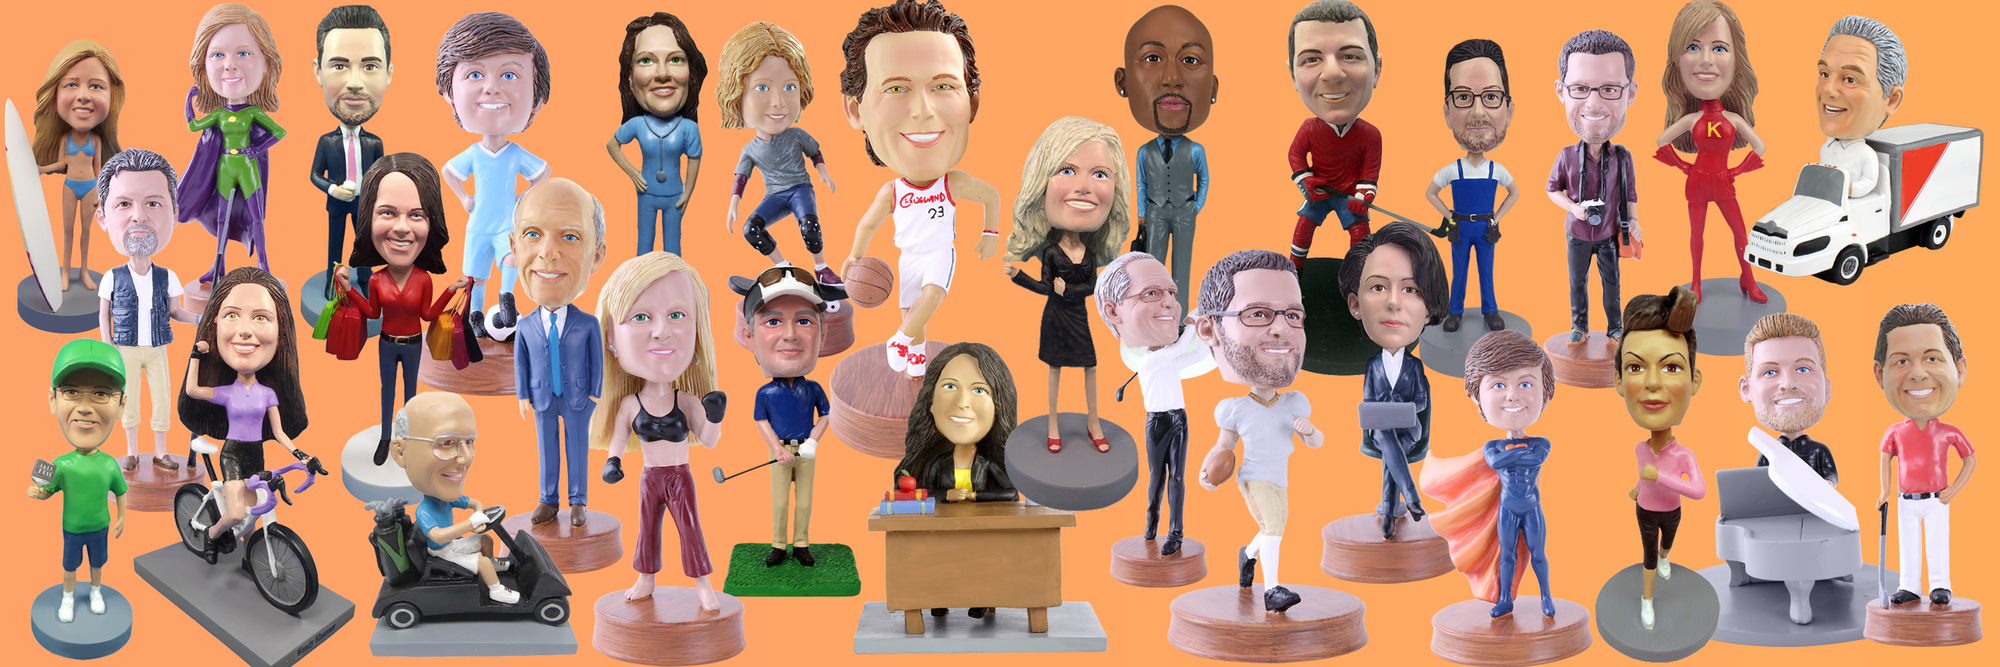 AllBobbleheads.com Top 10 Fun Occasions to Gift a Custom Bobblehead